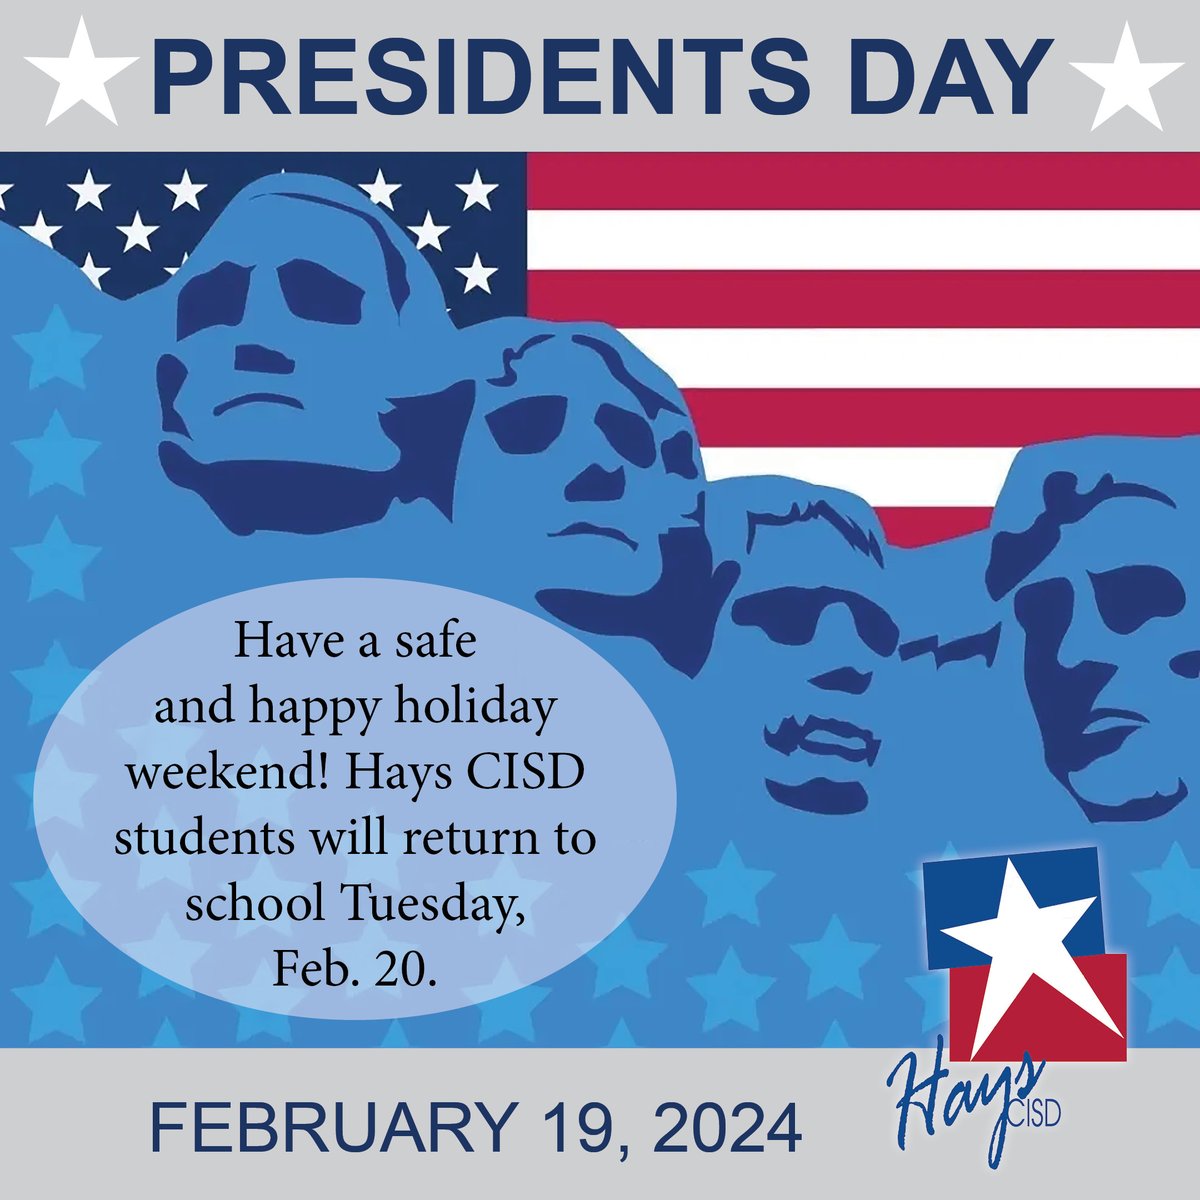 Monday, Feb. 19 is Presidents Day! It will also be a student/staff holiday. Hays CISD students/staff will return to class Tuesday, Feb. 20. Have a safe and happy holiday weekend!